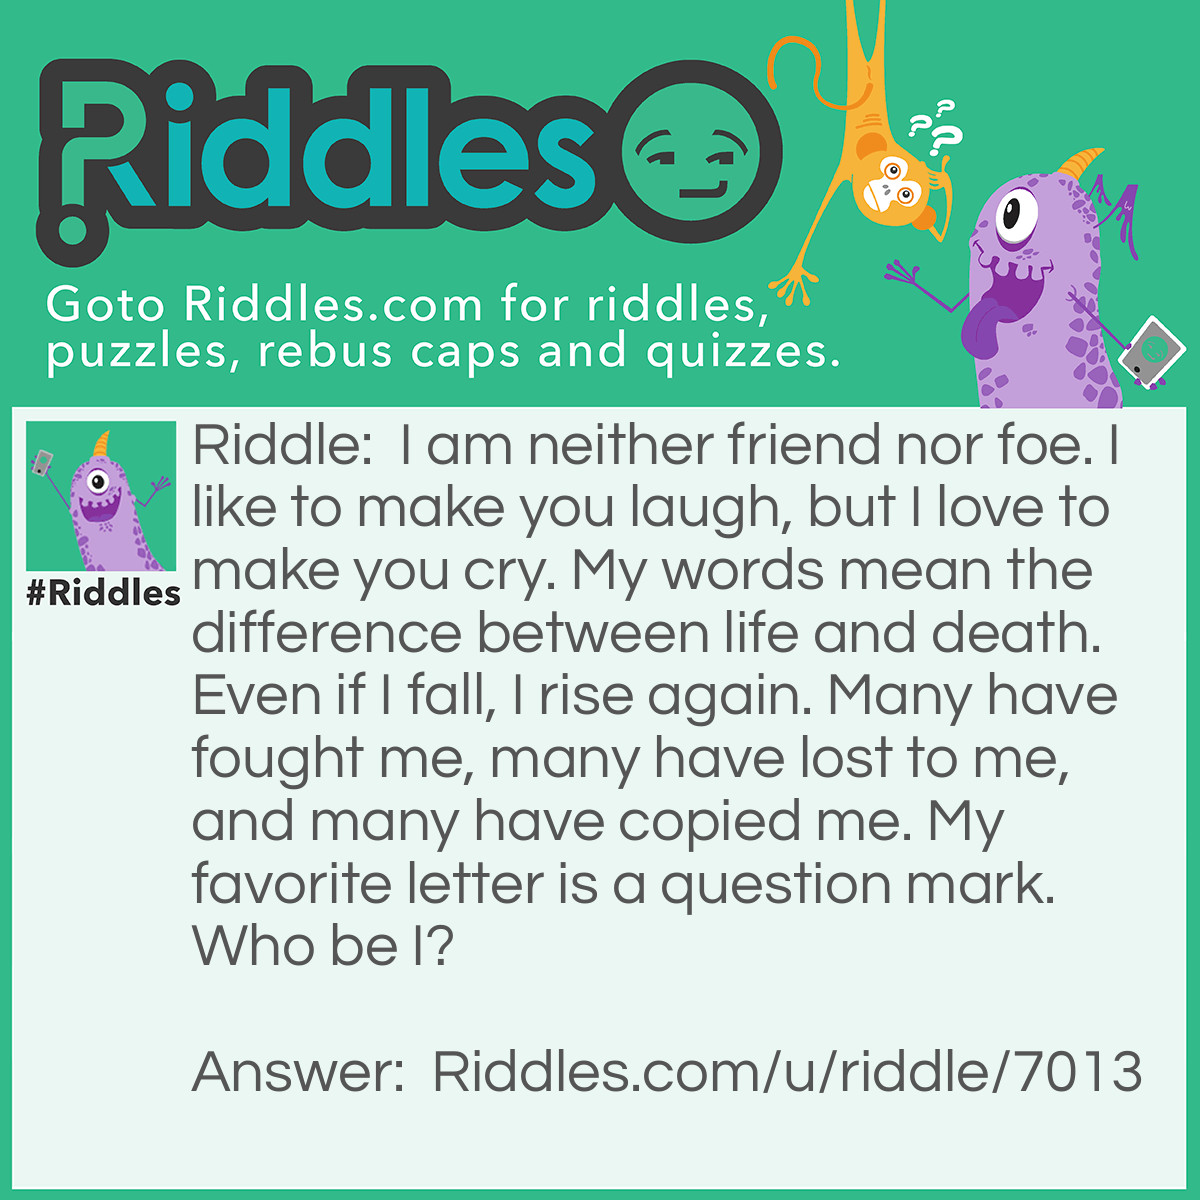 Riddle: I am neither friend nor foe. I like to make you laugh, but I love to make you cry. My words mean the difference between life and death. Even if I fall, I rise again. Many have fought me, many have lost to me, and many have copied me. My favorite letter is a question mark. Who be I? Answer: The riddler.